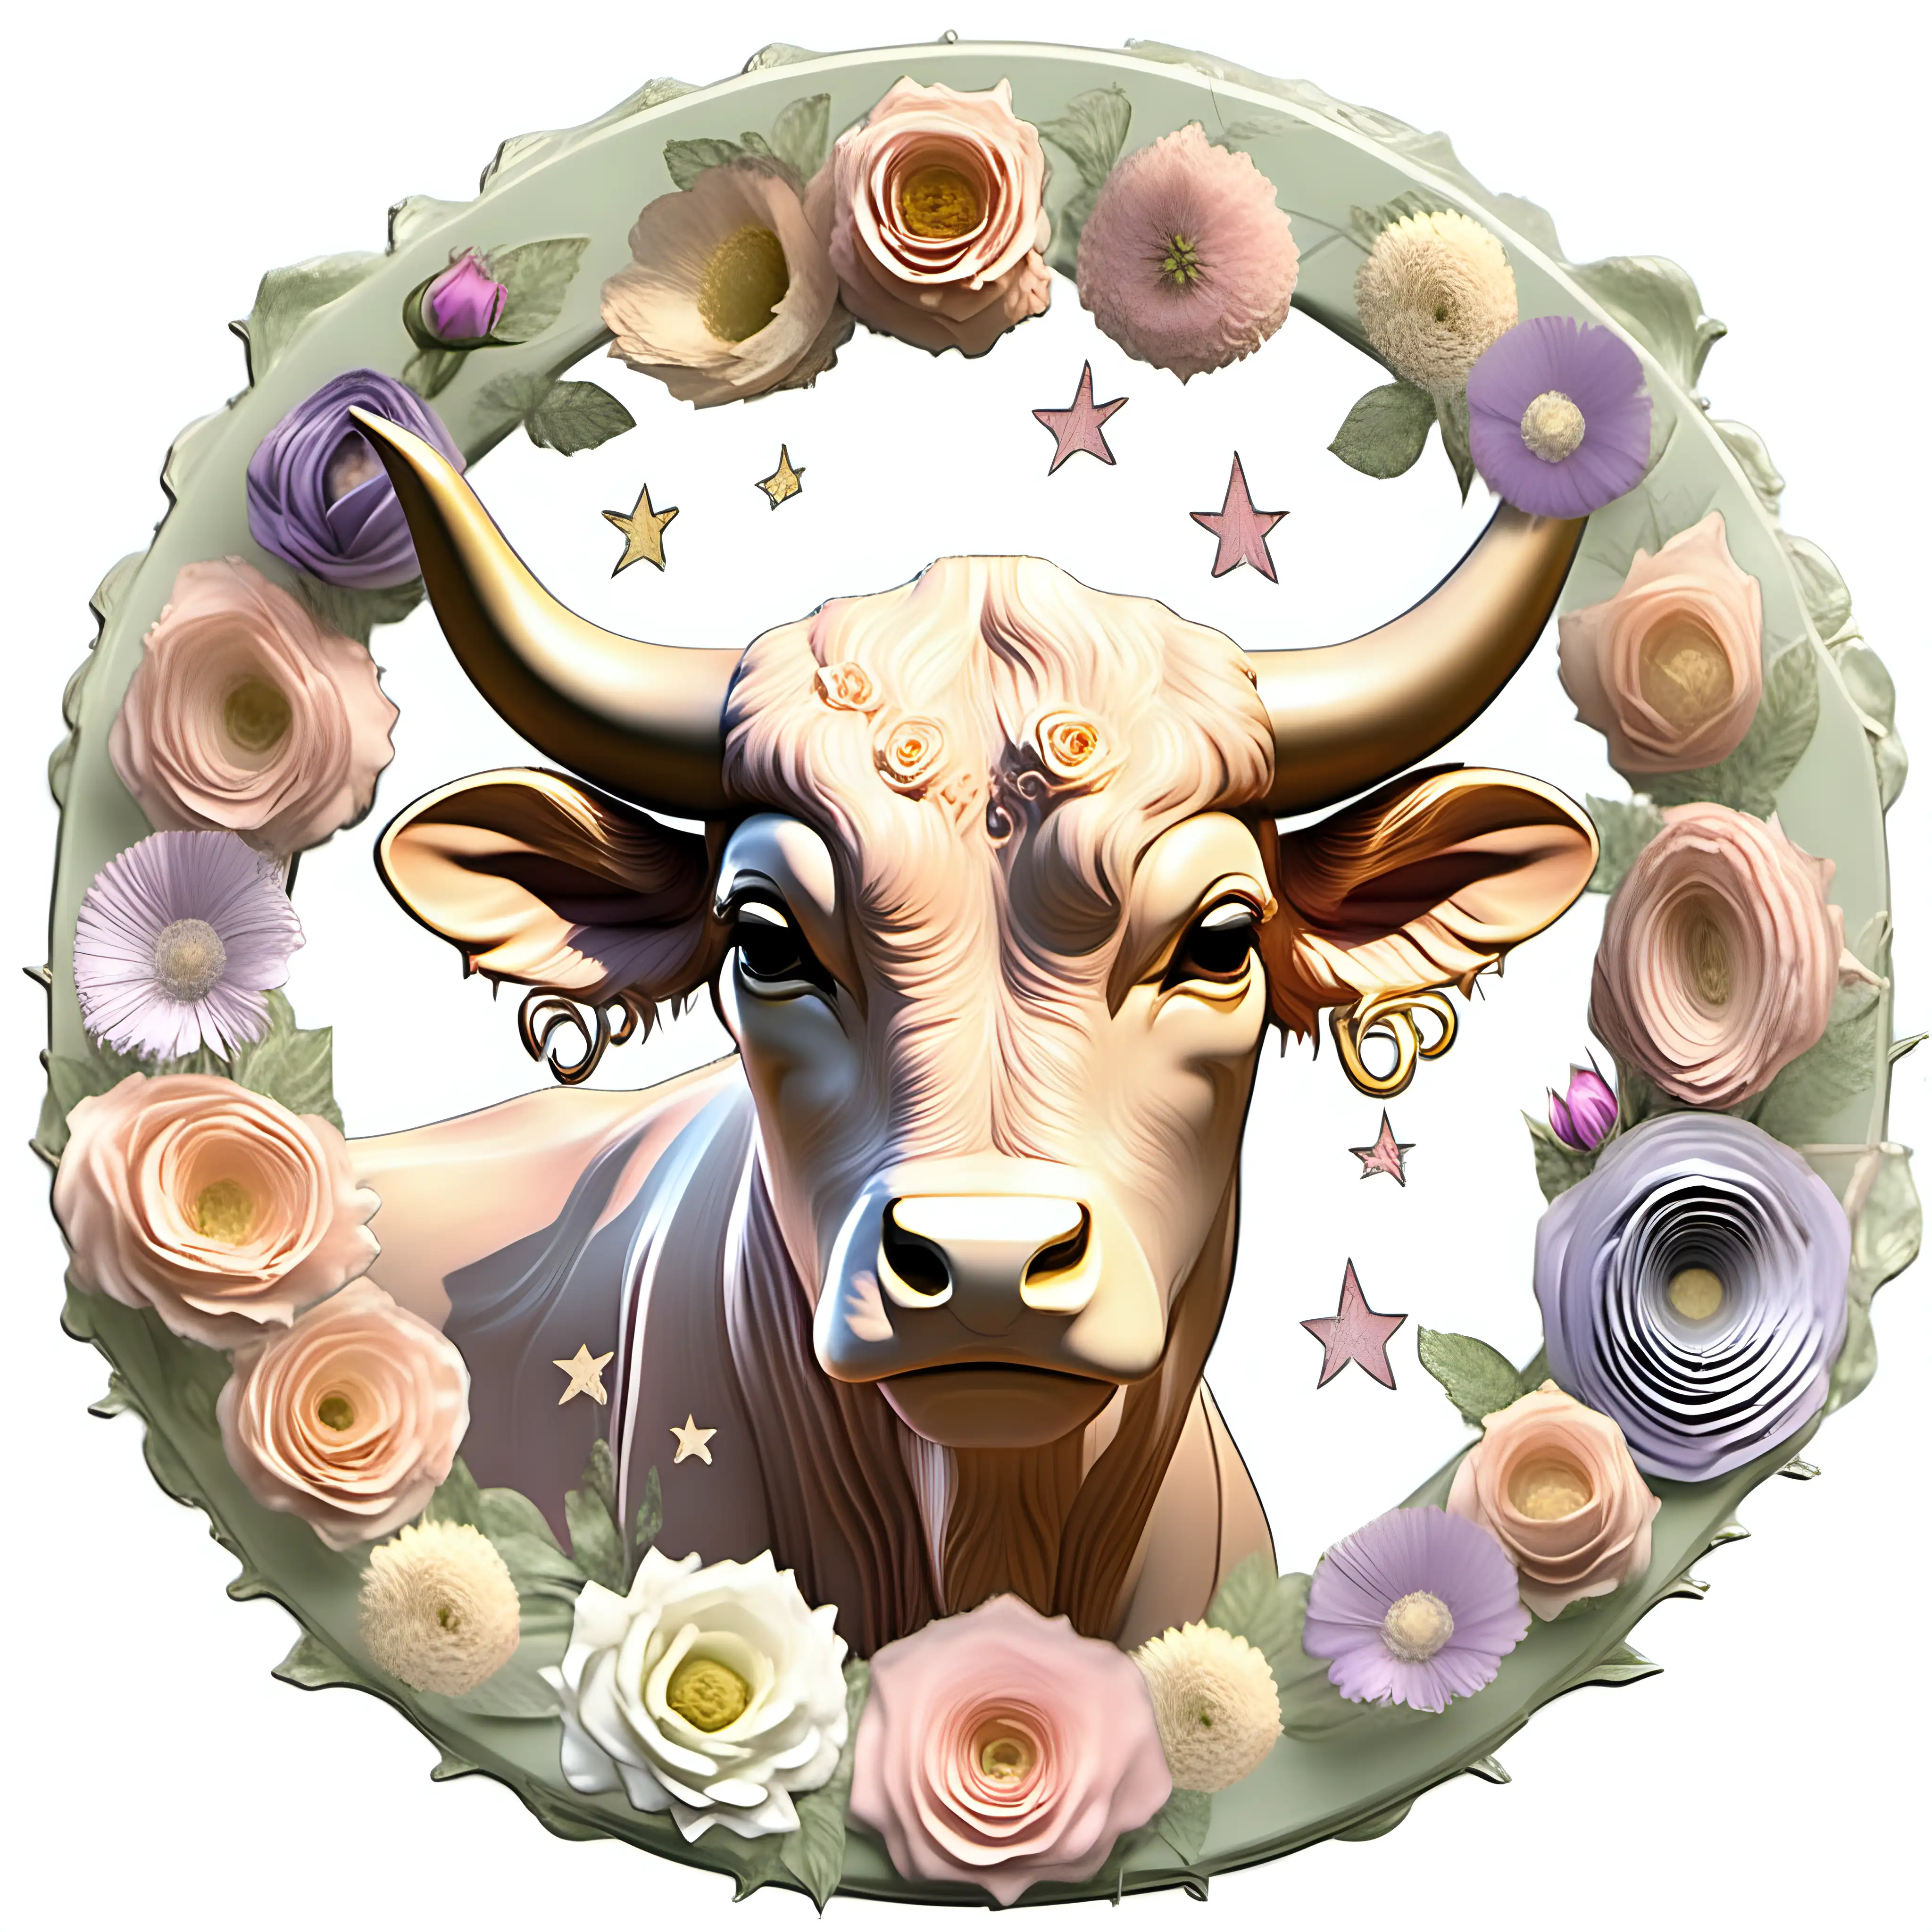 Create a pastel shabby chic  cartoon image of the Taurus zodiac sign with complimenting flowers embedded in the symbol; all of this inside of a pastel circular frame on a transparent background